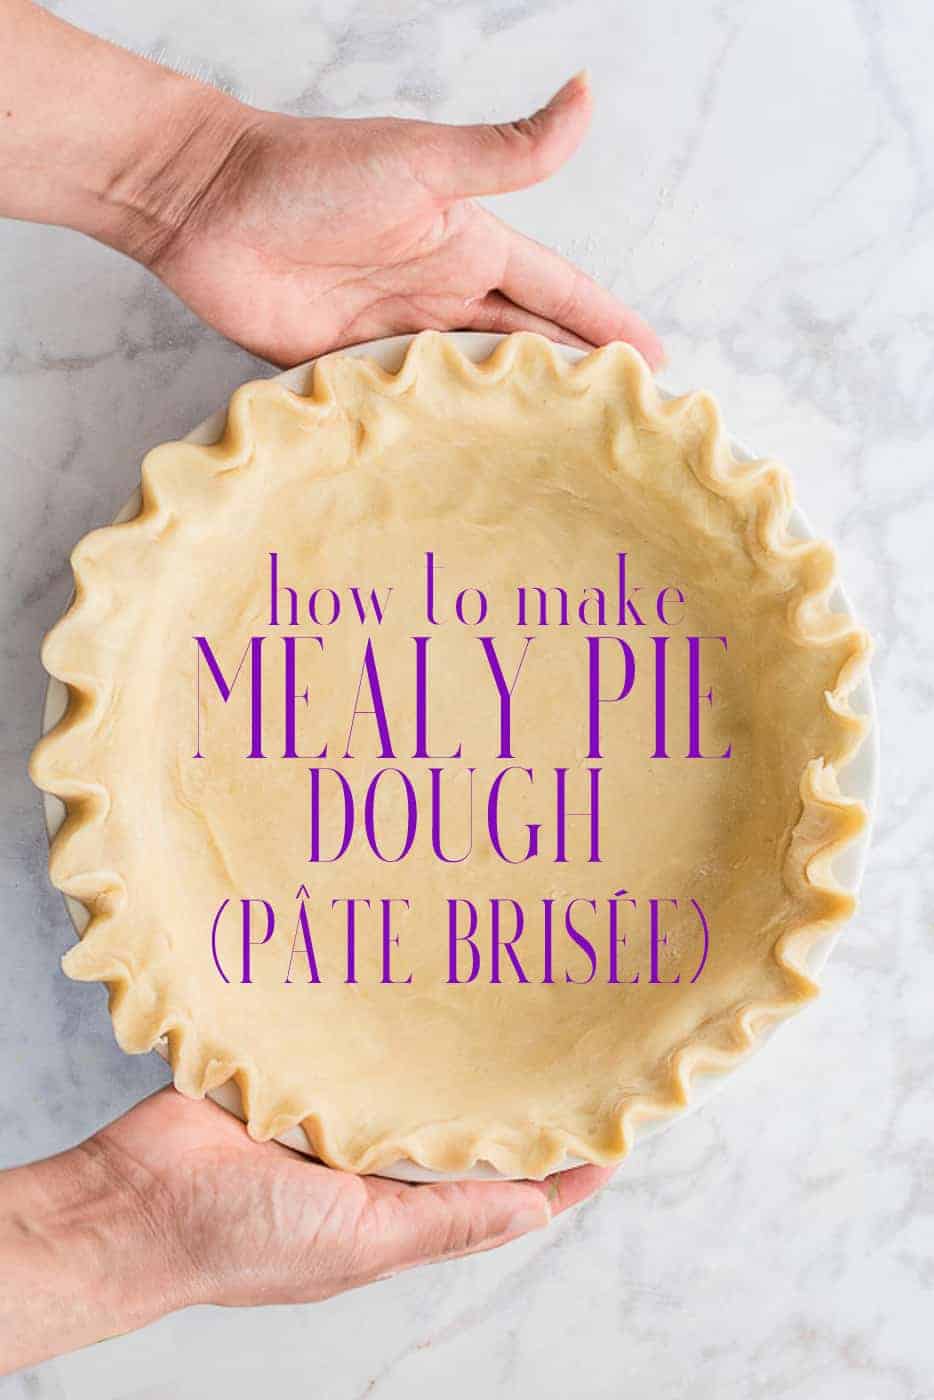 Mealy Pie Dough (Pate Brisee) makes your custard pies and quiches more appetizing. The way the dough is prepared prevents your bottom crusts from becoming soggy when it's filled with liquid fillings. Easy to follow recipe instructions ensure you have success every time. #mealypiedough #piedough #patebrisee #patesucree #custardpies #pumpkinpie #sweetpotatopie #pecanpie #baking #piemaking #holidaypie #holidaydessert #quicherecipe via @ediblesense